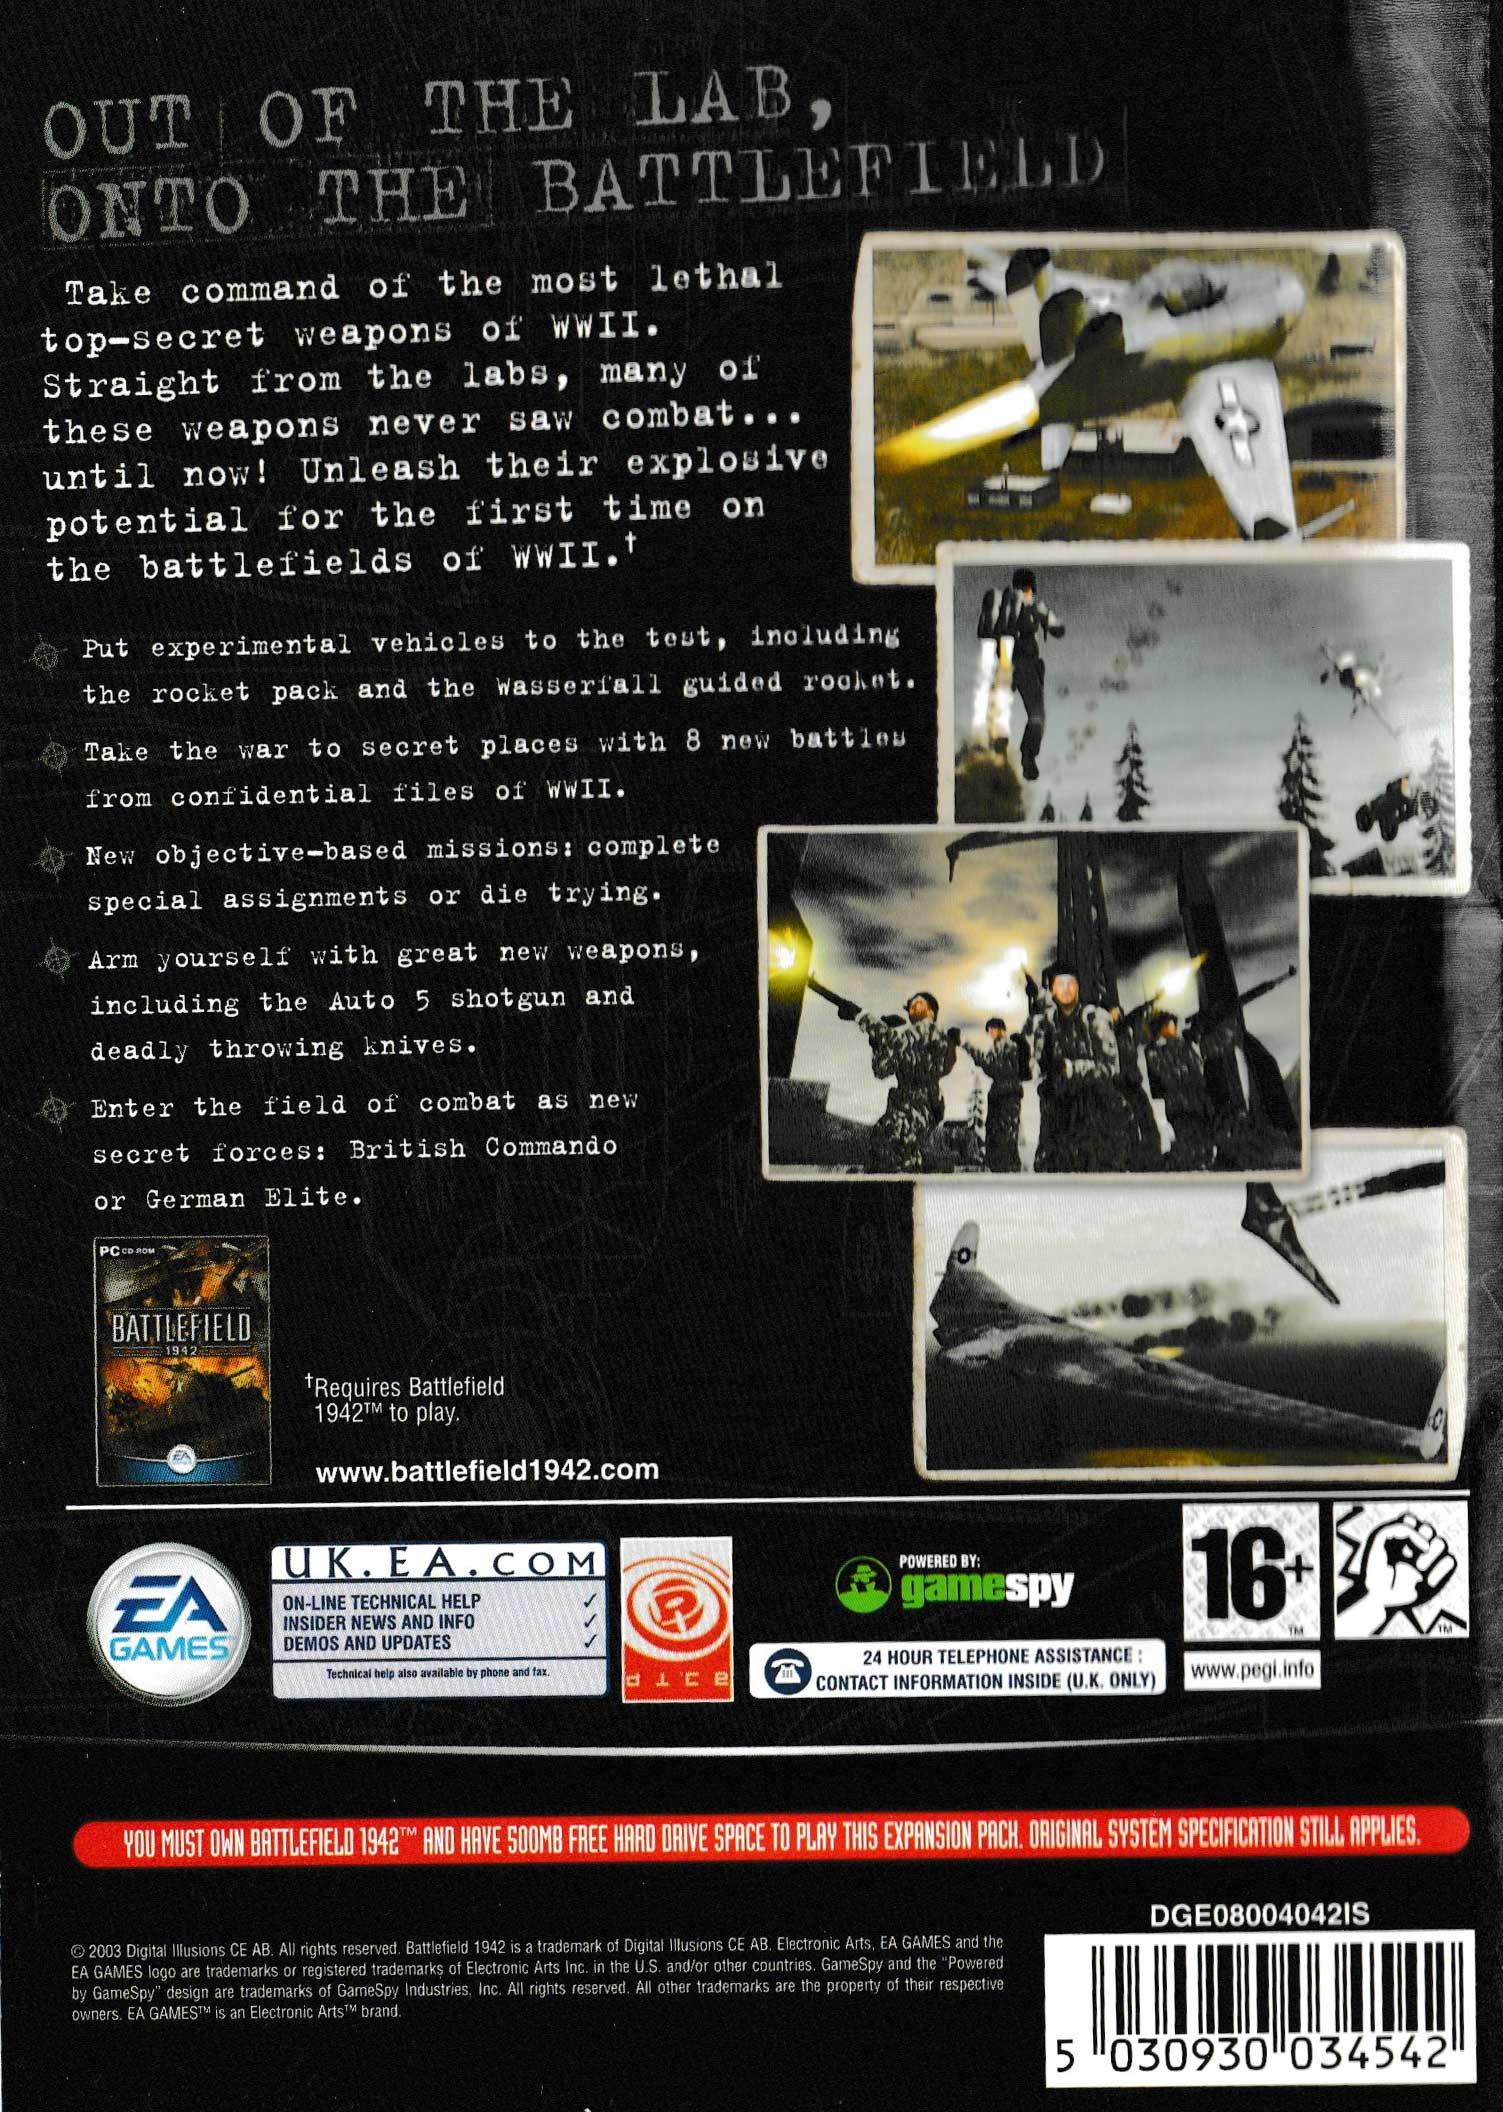 Battlefield 1942 Secret Weapons Of WWII - Classic Windows PC Game